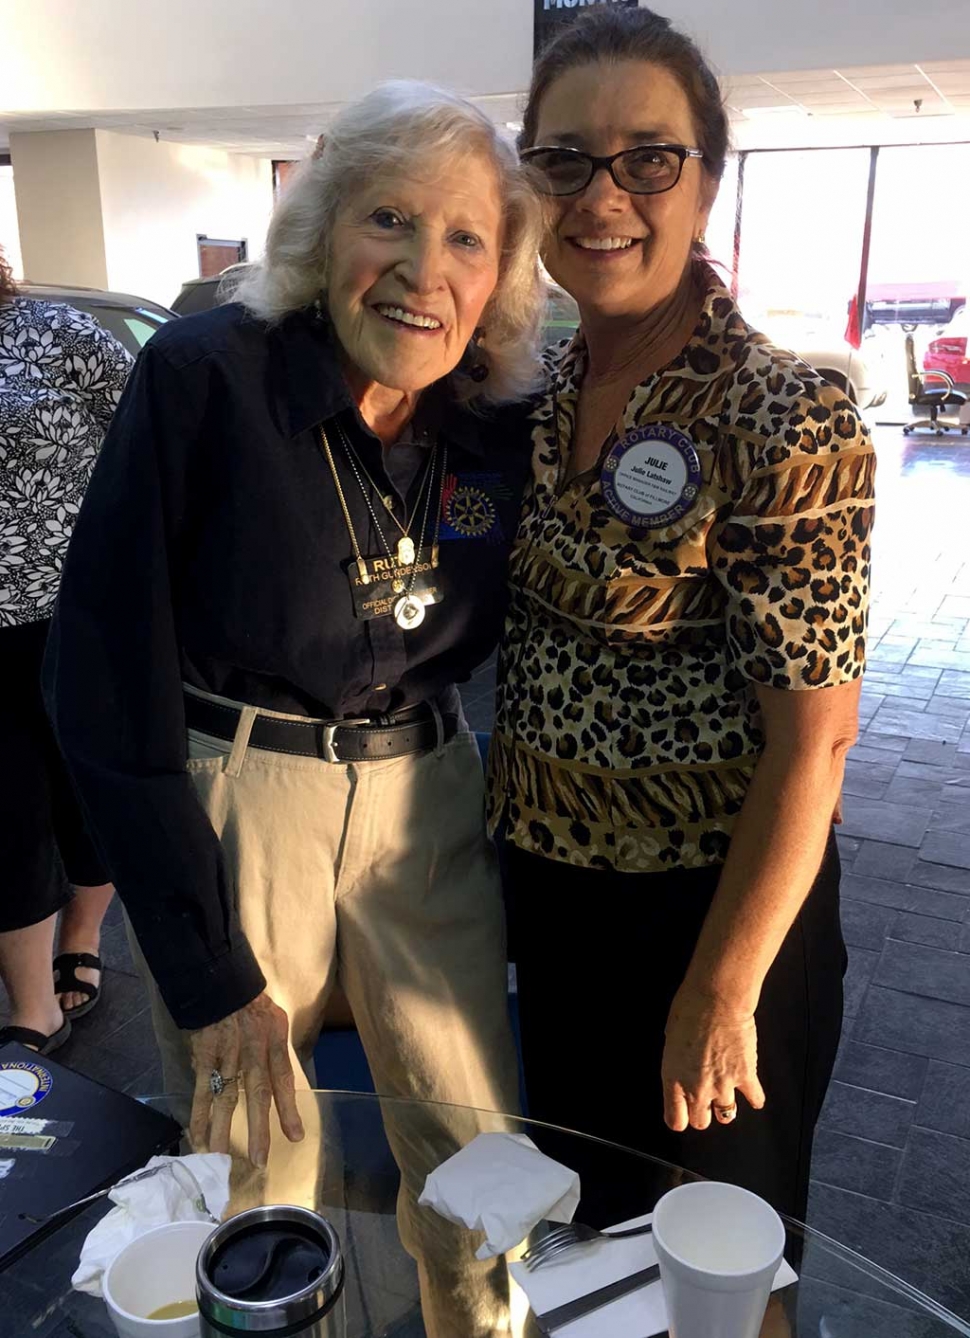 Fillmore Rotarians sang Happy Birthday to celebrate the day with members Ruthie Gunderson and Julie Latshaw.